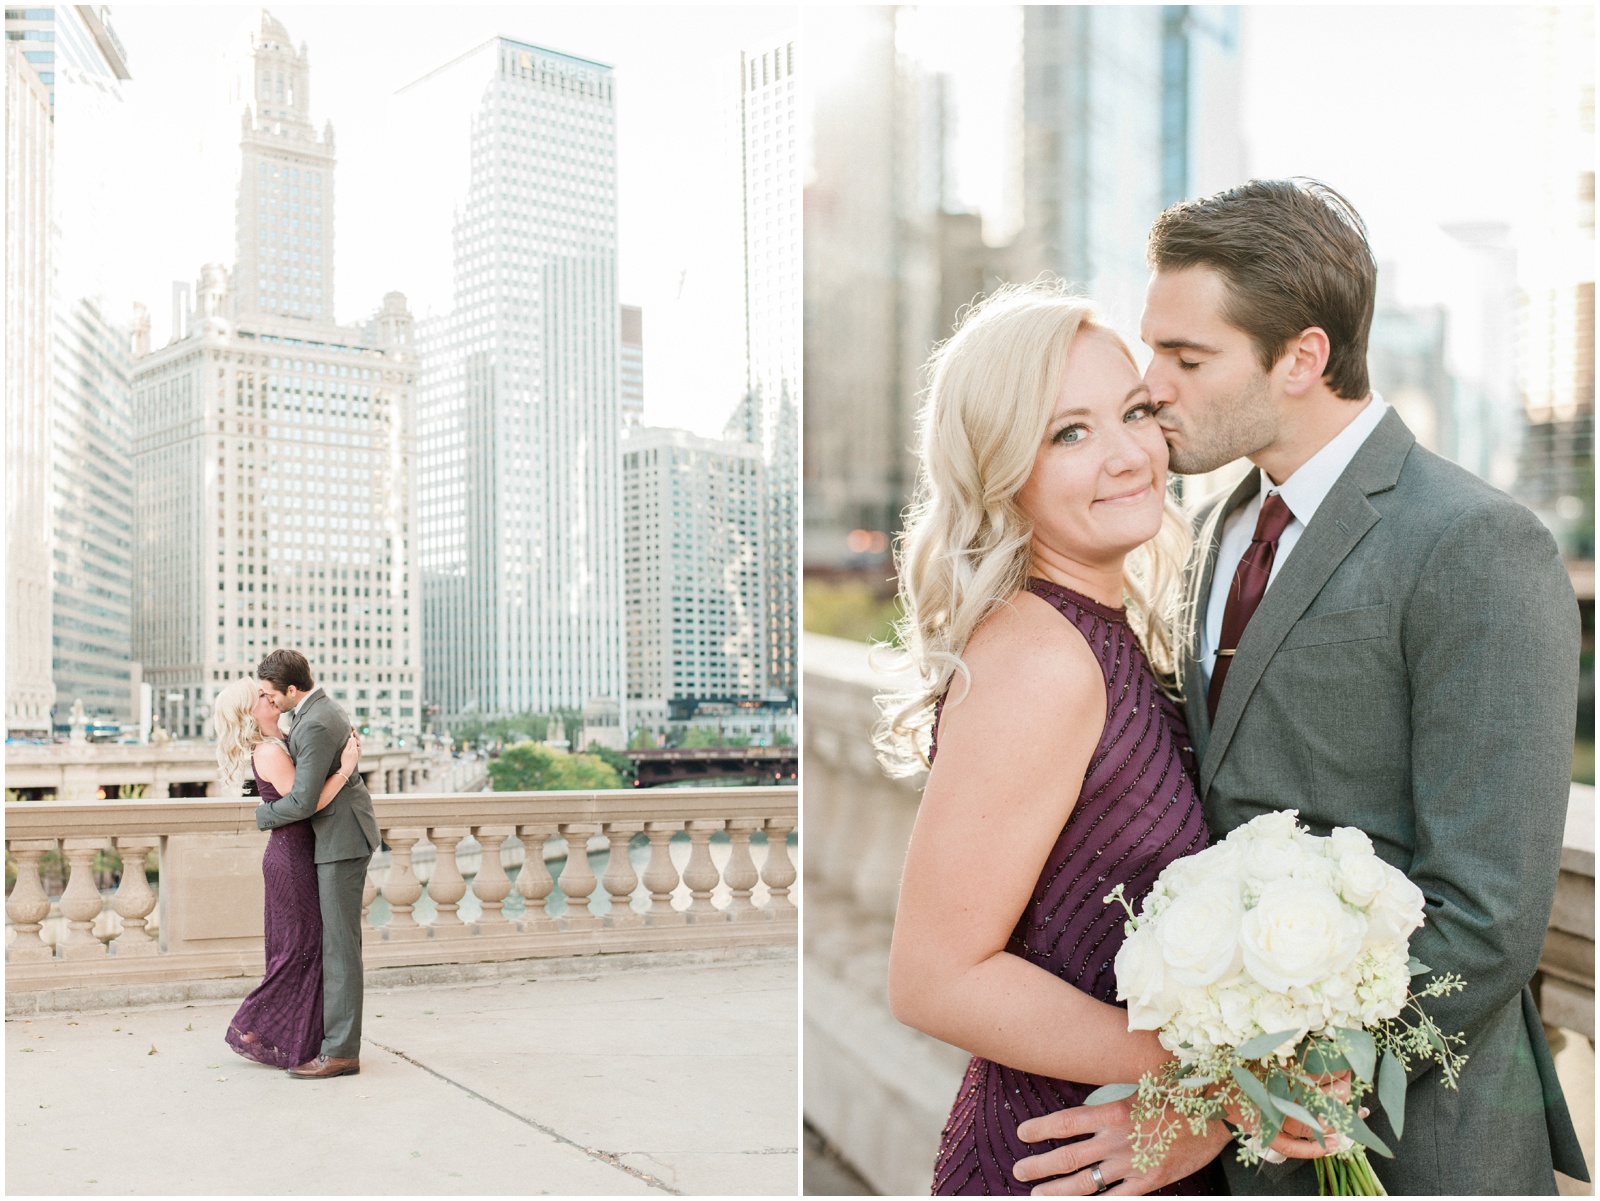 Sunrise anniversary session downtown Chicago